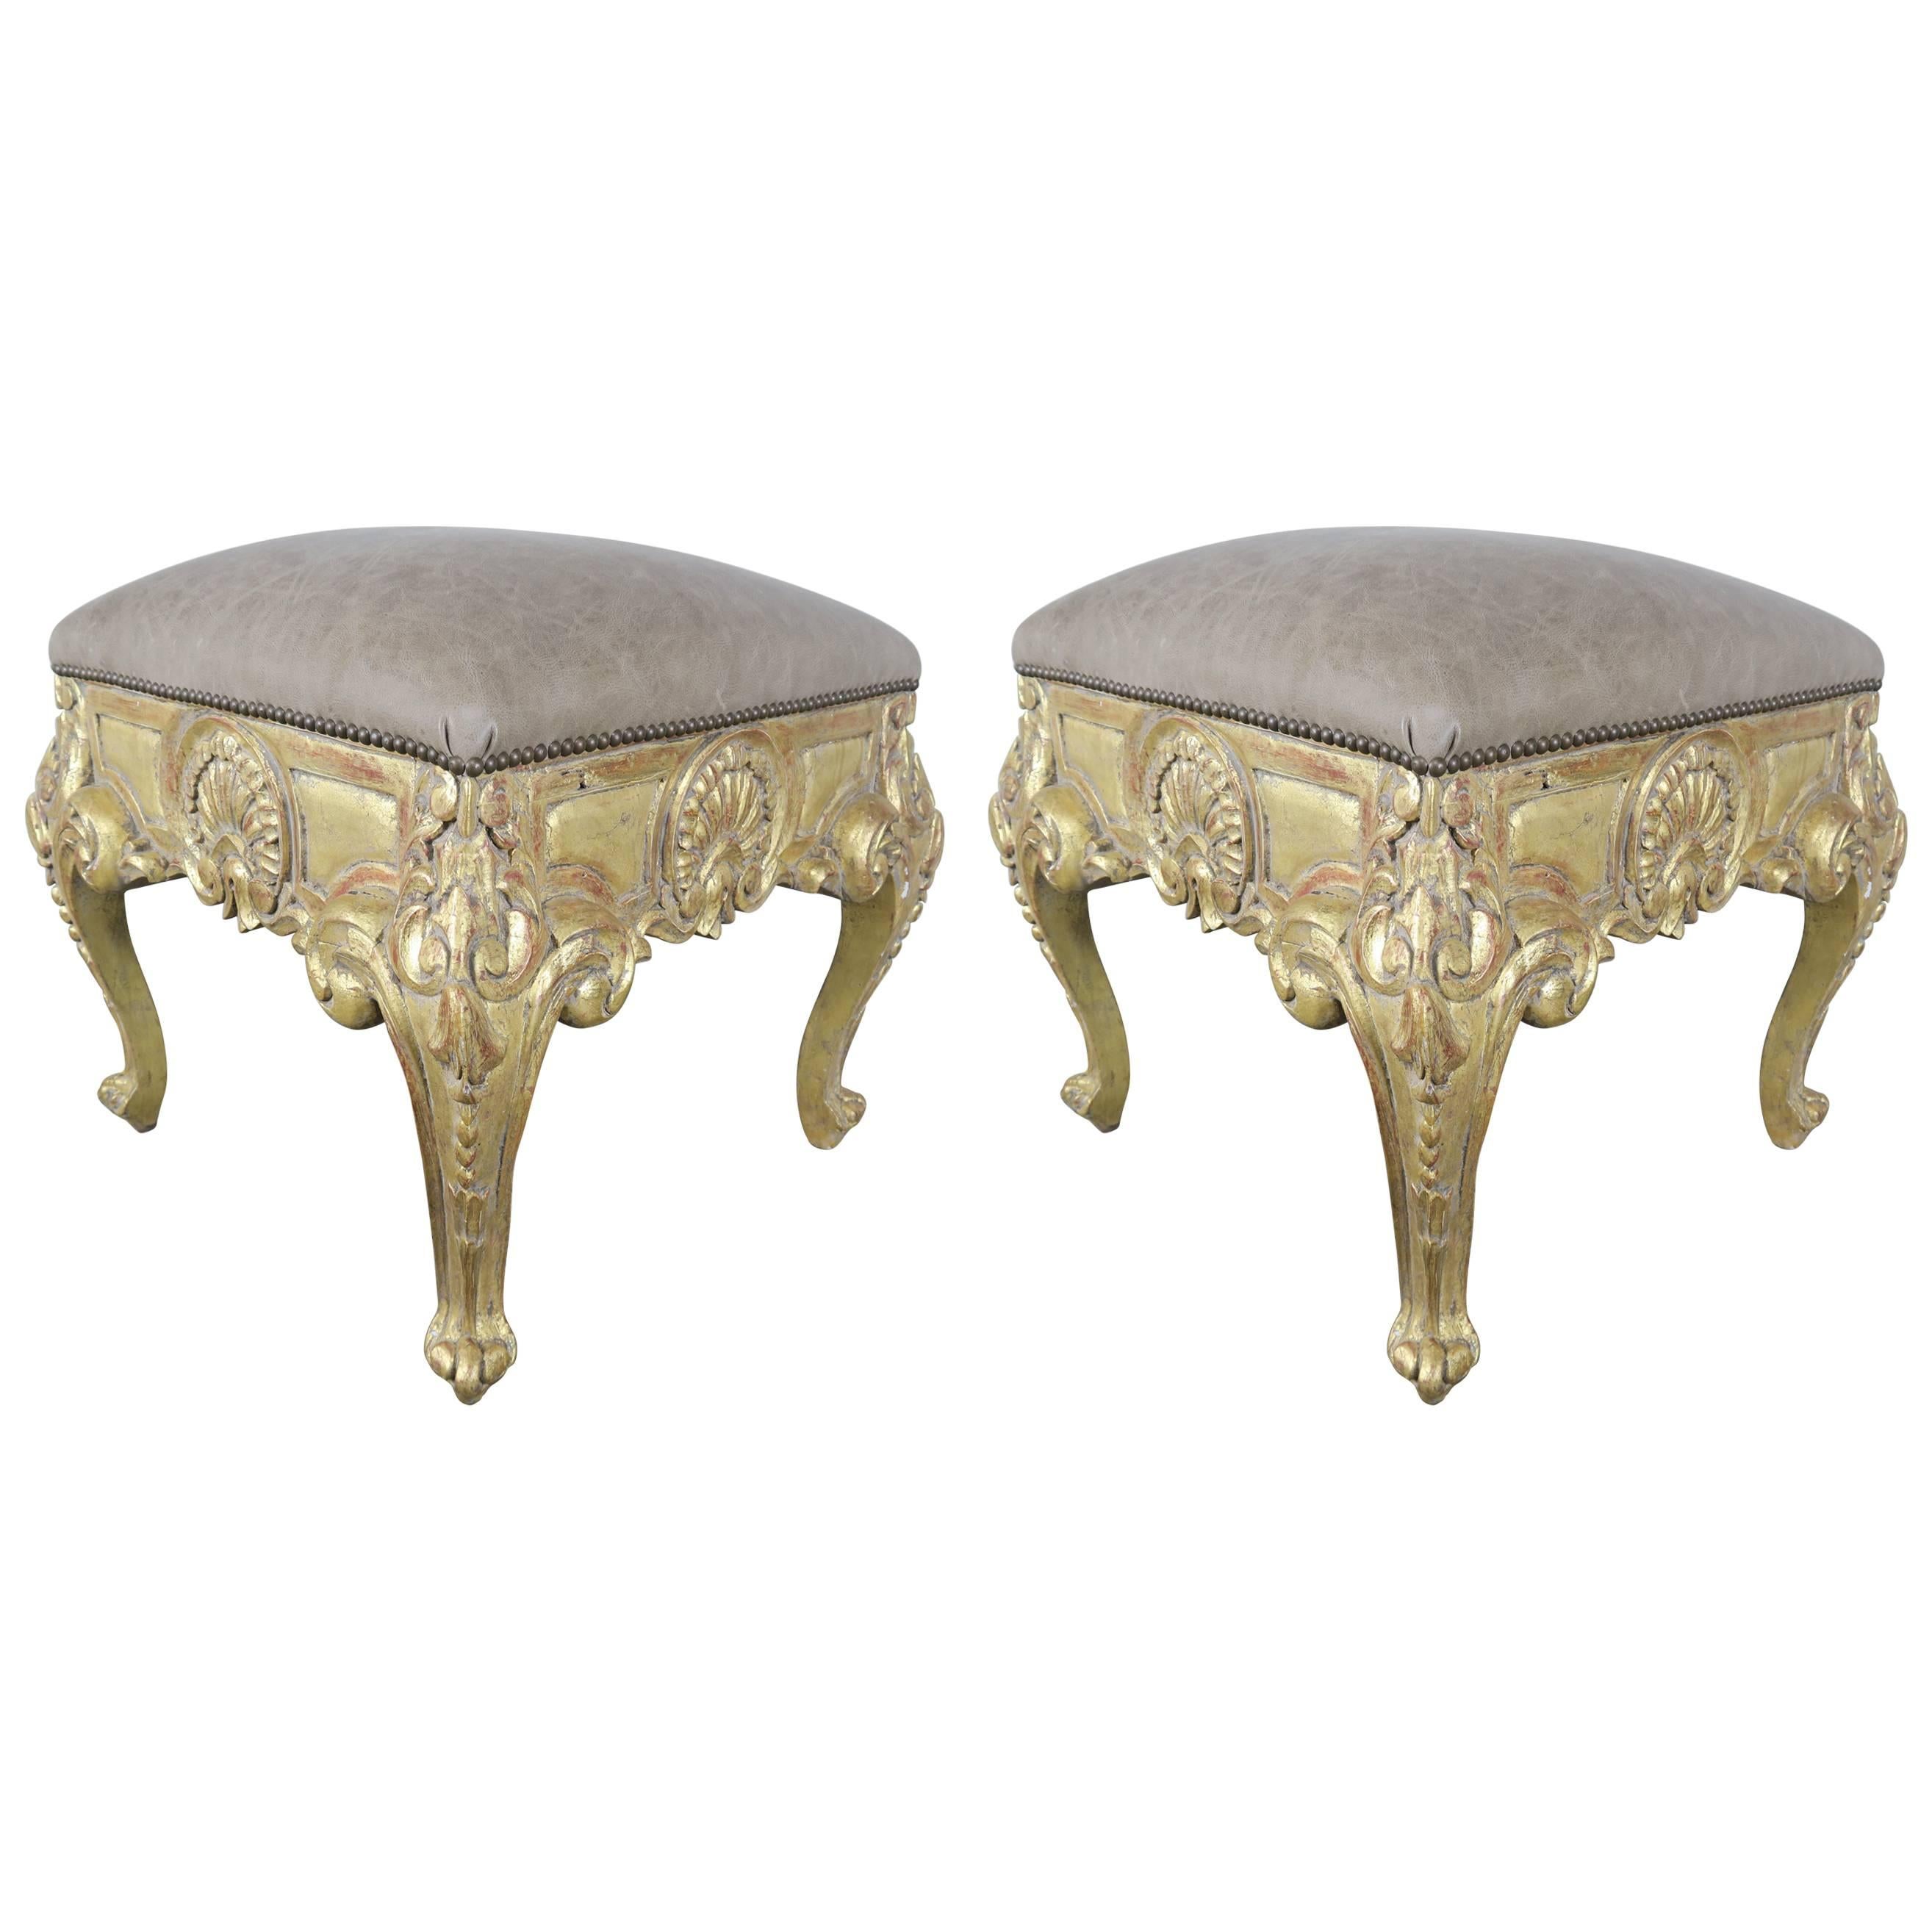 Pair of French Giltwood Benches with Leather Upholstery